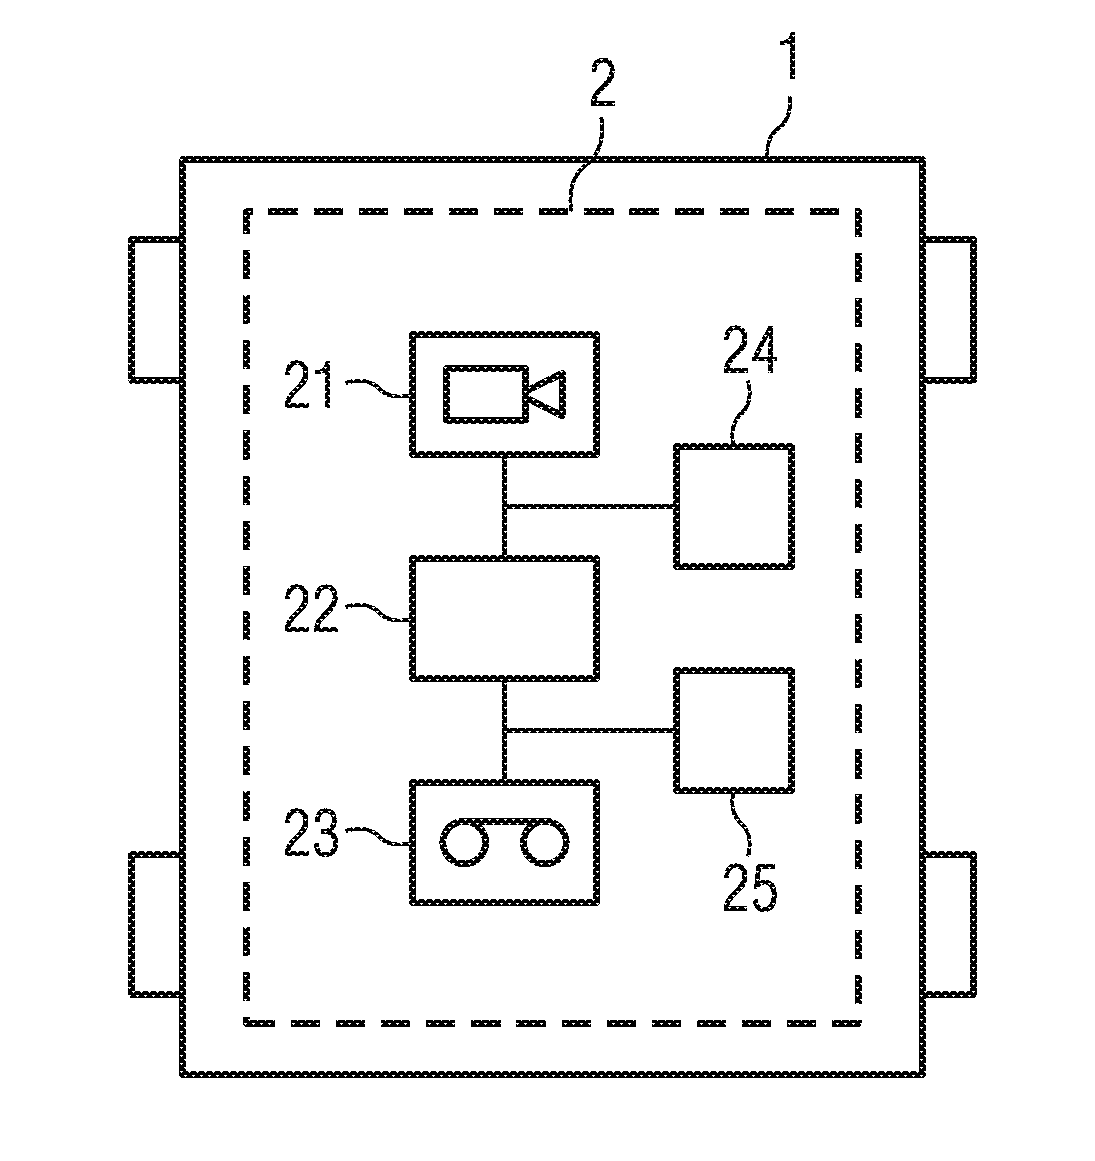 Apparatus and Method for Recording Data Associated with a Vehicle